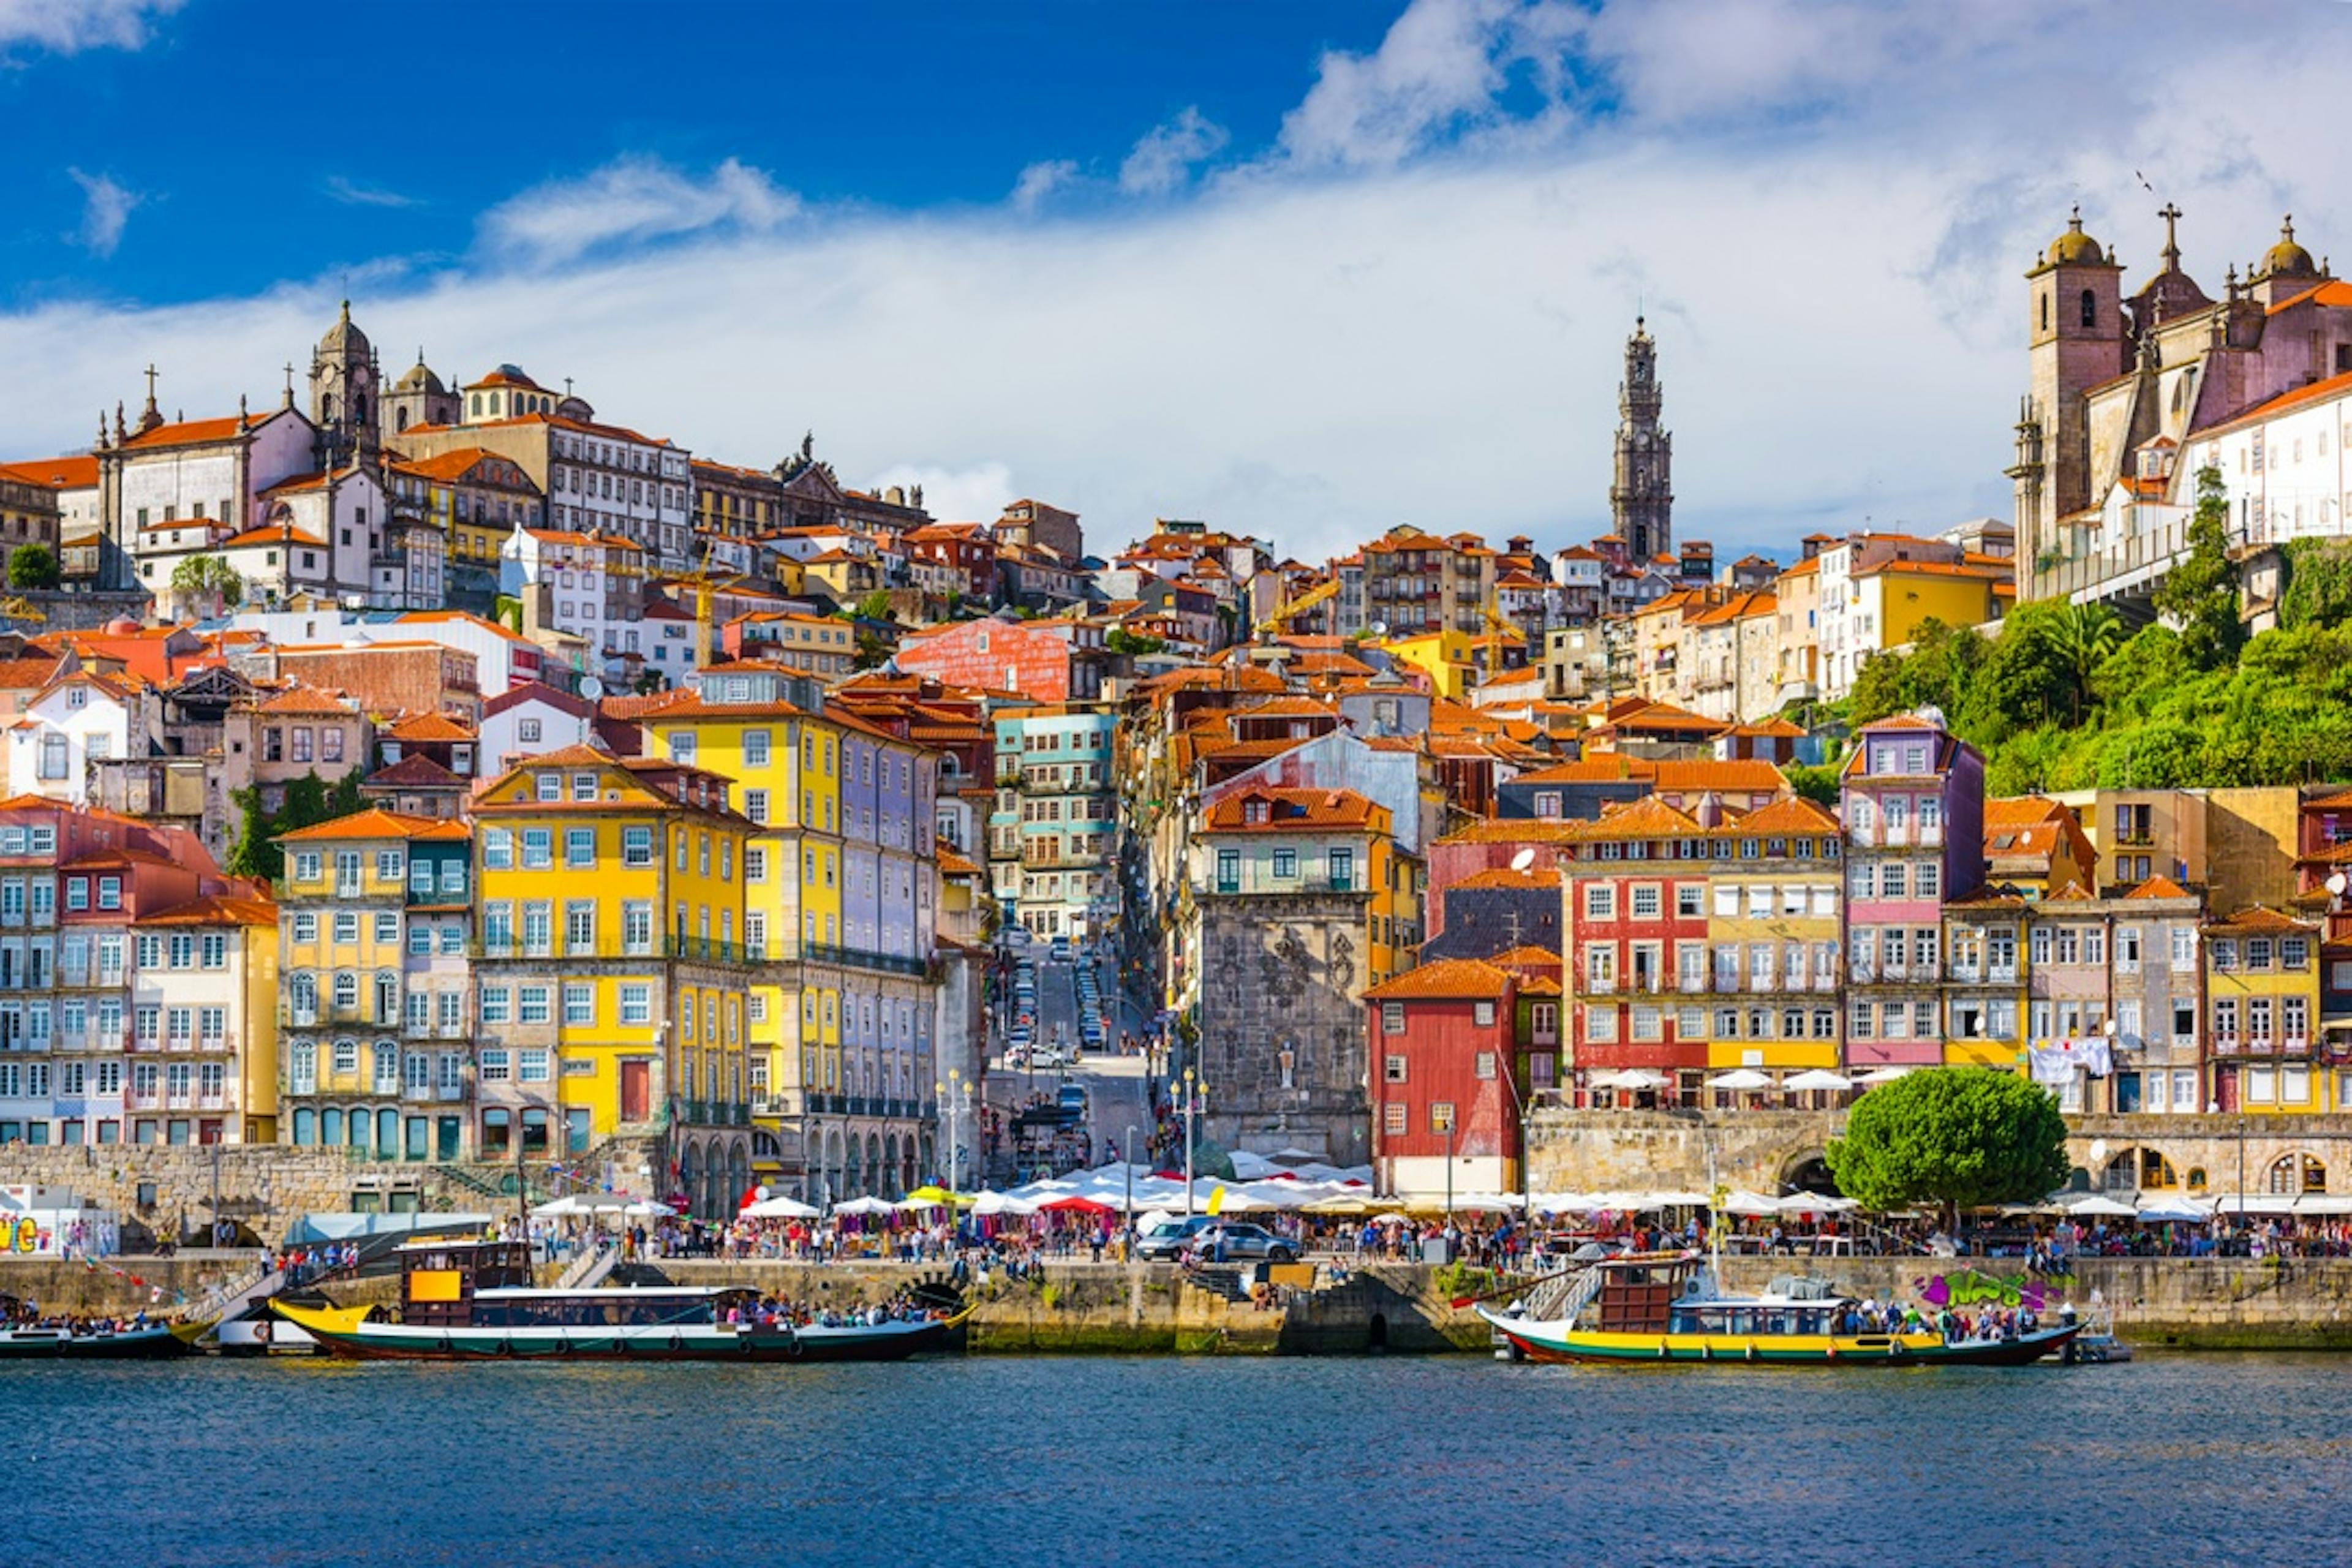 Employers can apply for the Portuguese tech visa for their employees